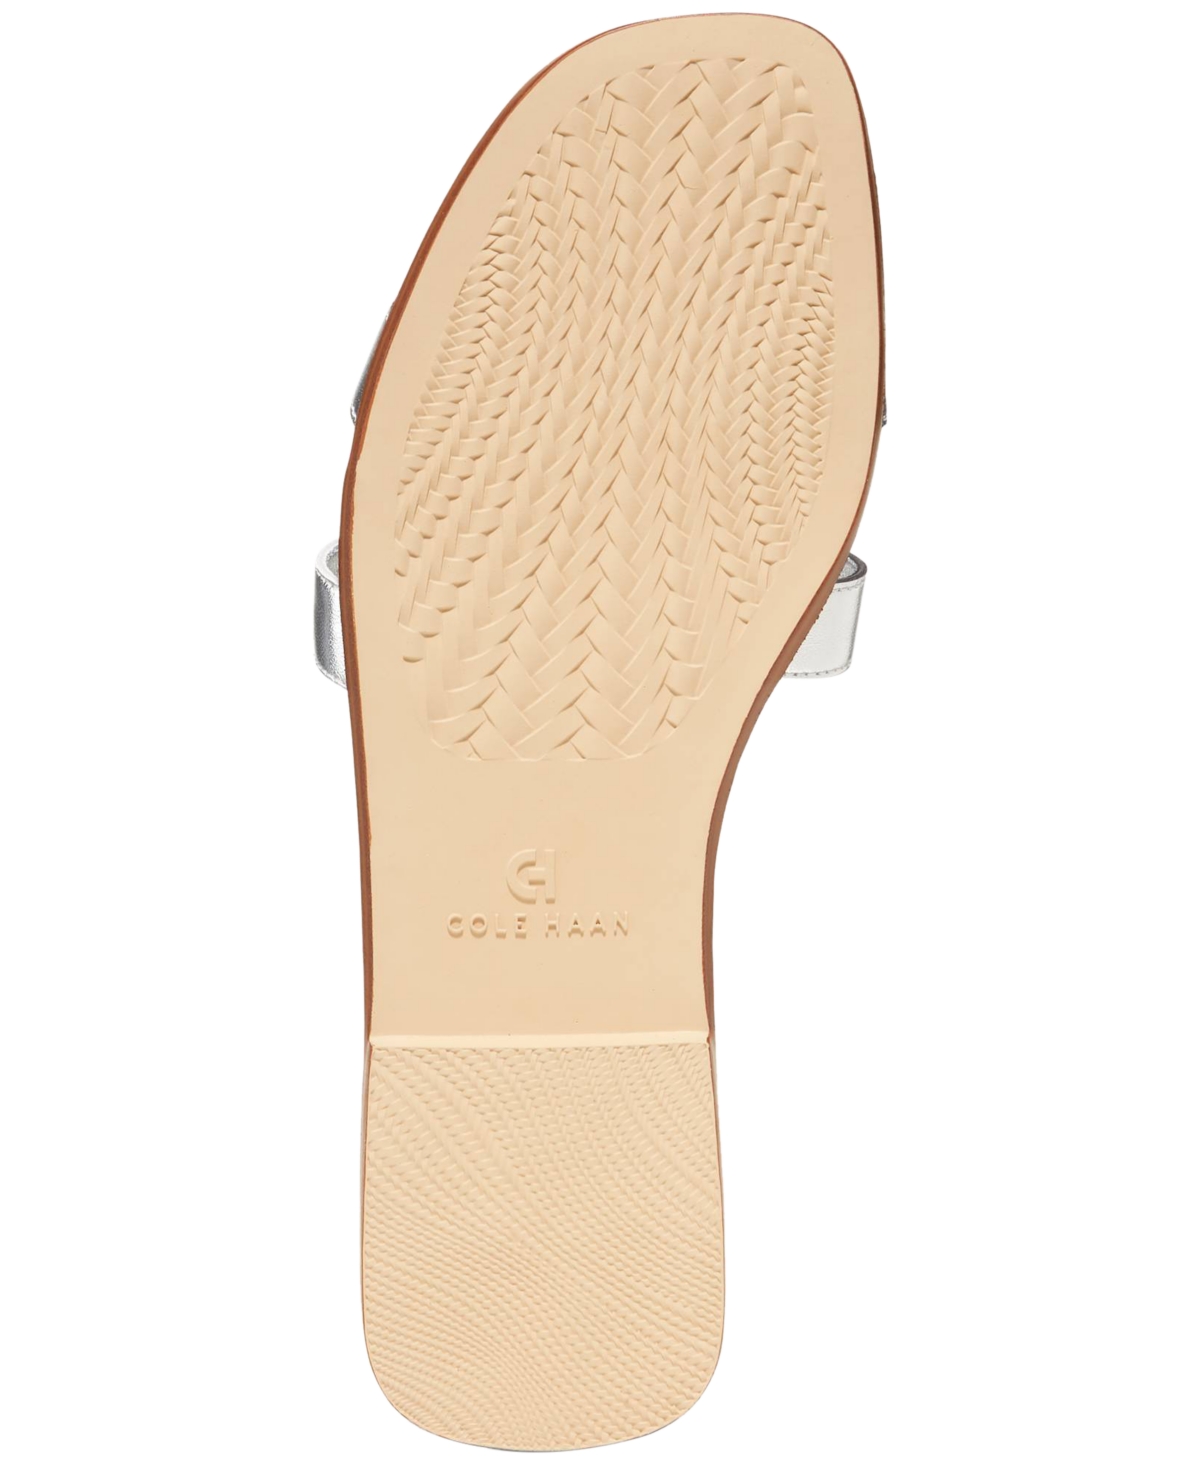 Shop Cole Haan Women's Chrisee Flat Sandals In True Red Croc Leather